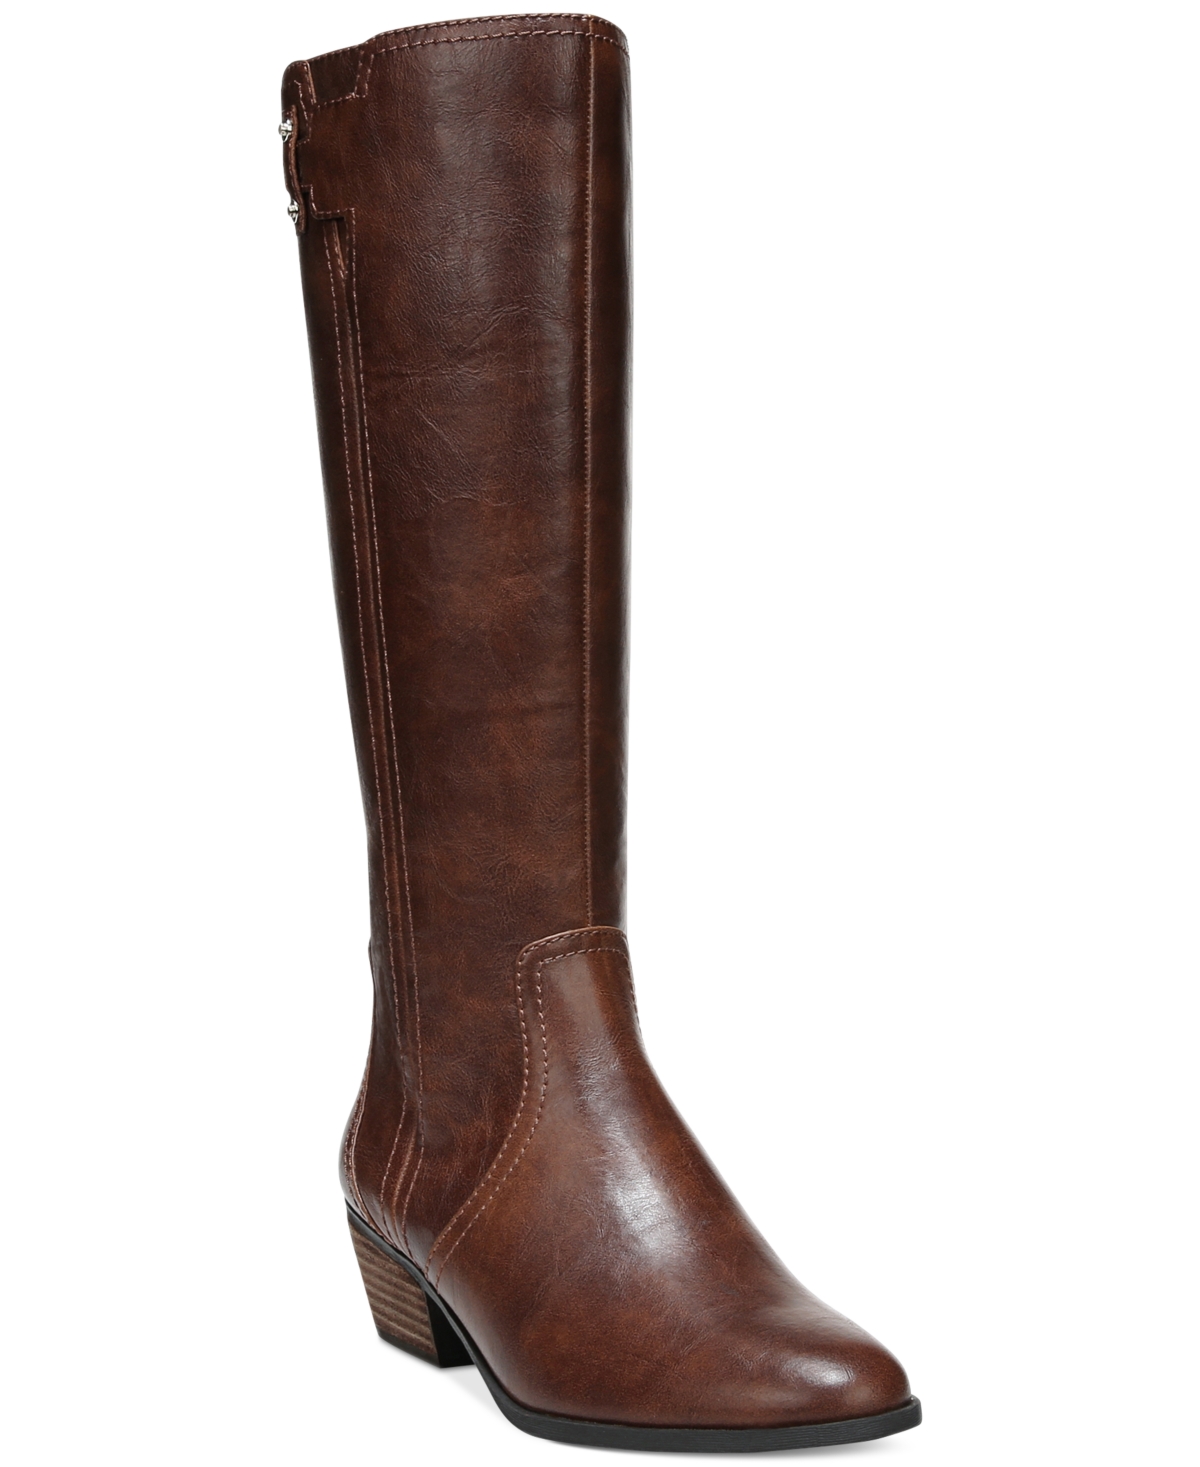 Women's Brilliance Tall Boots - Whiskey Faux Leather